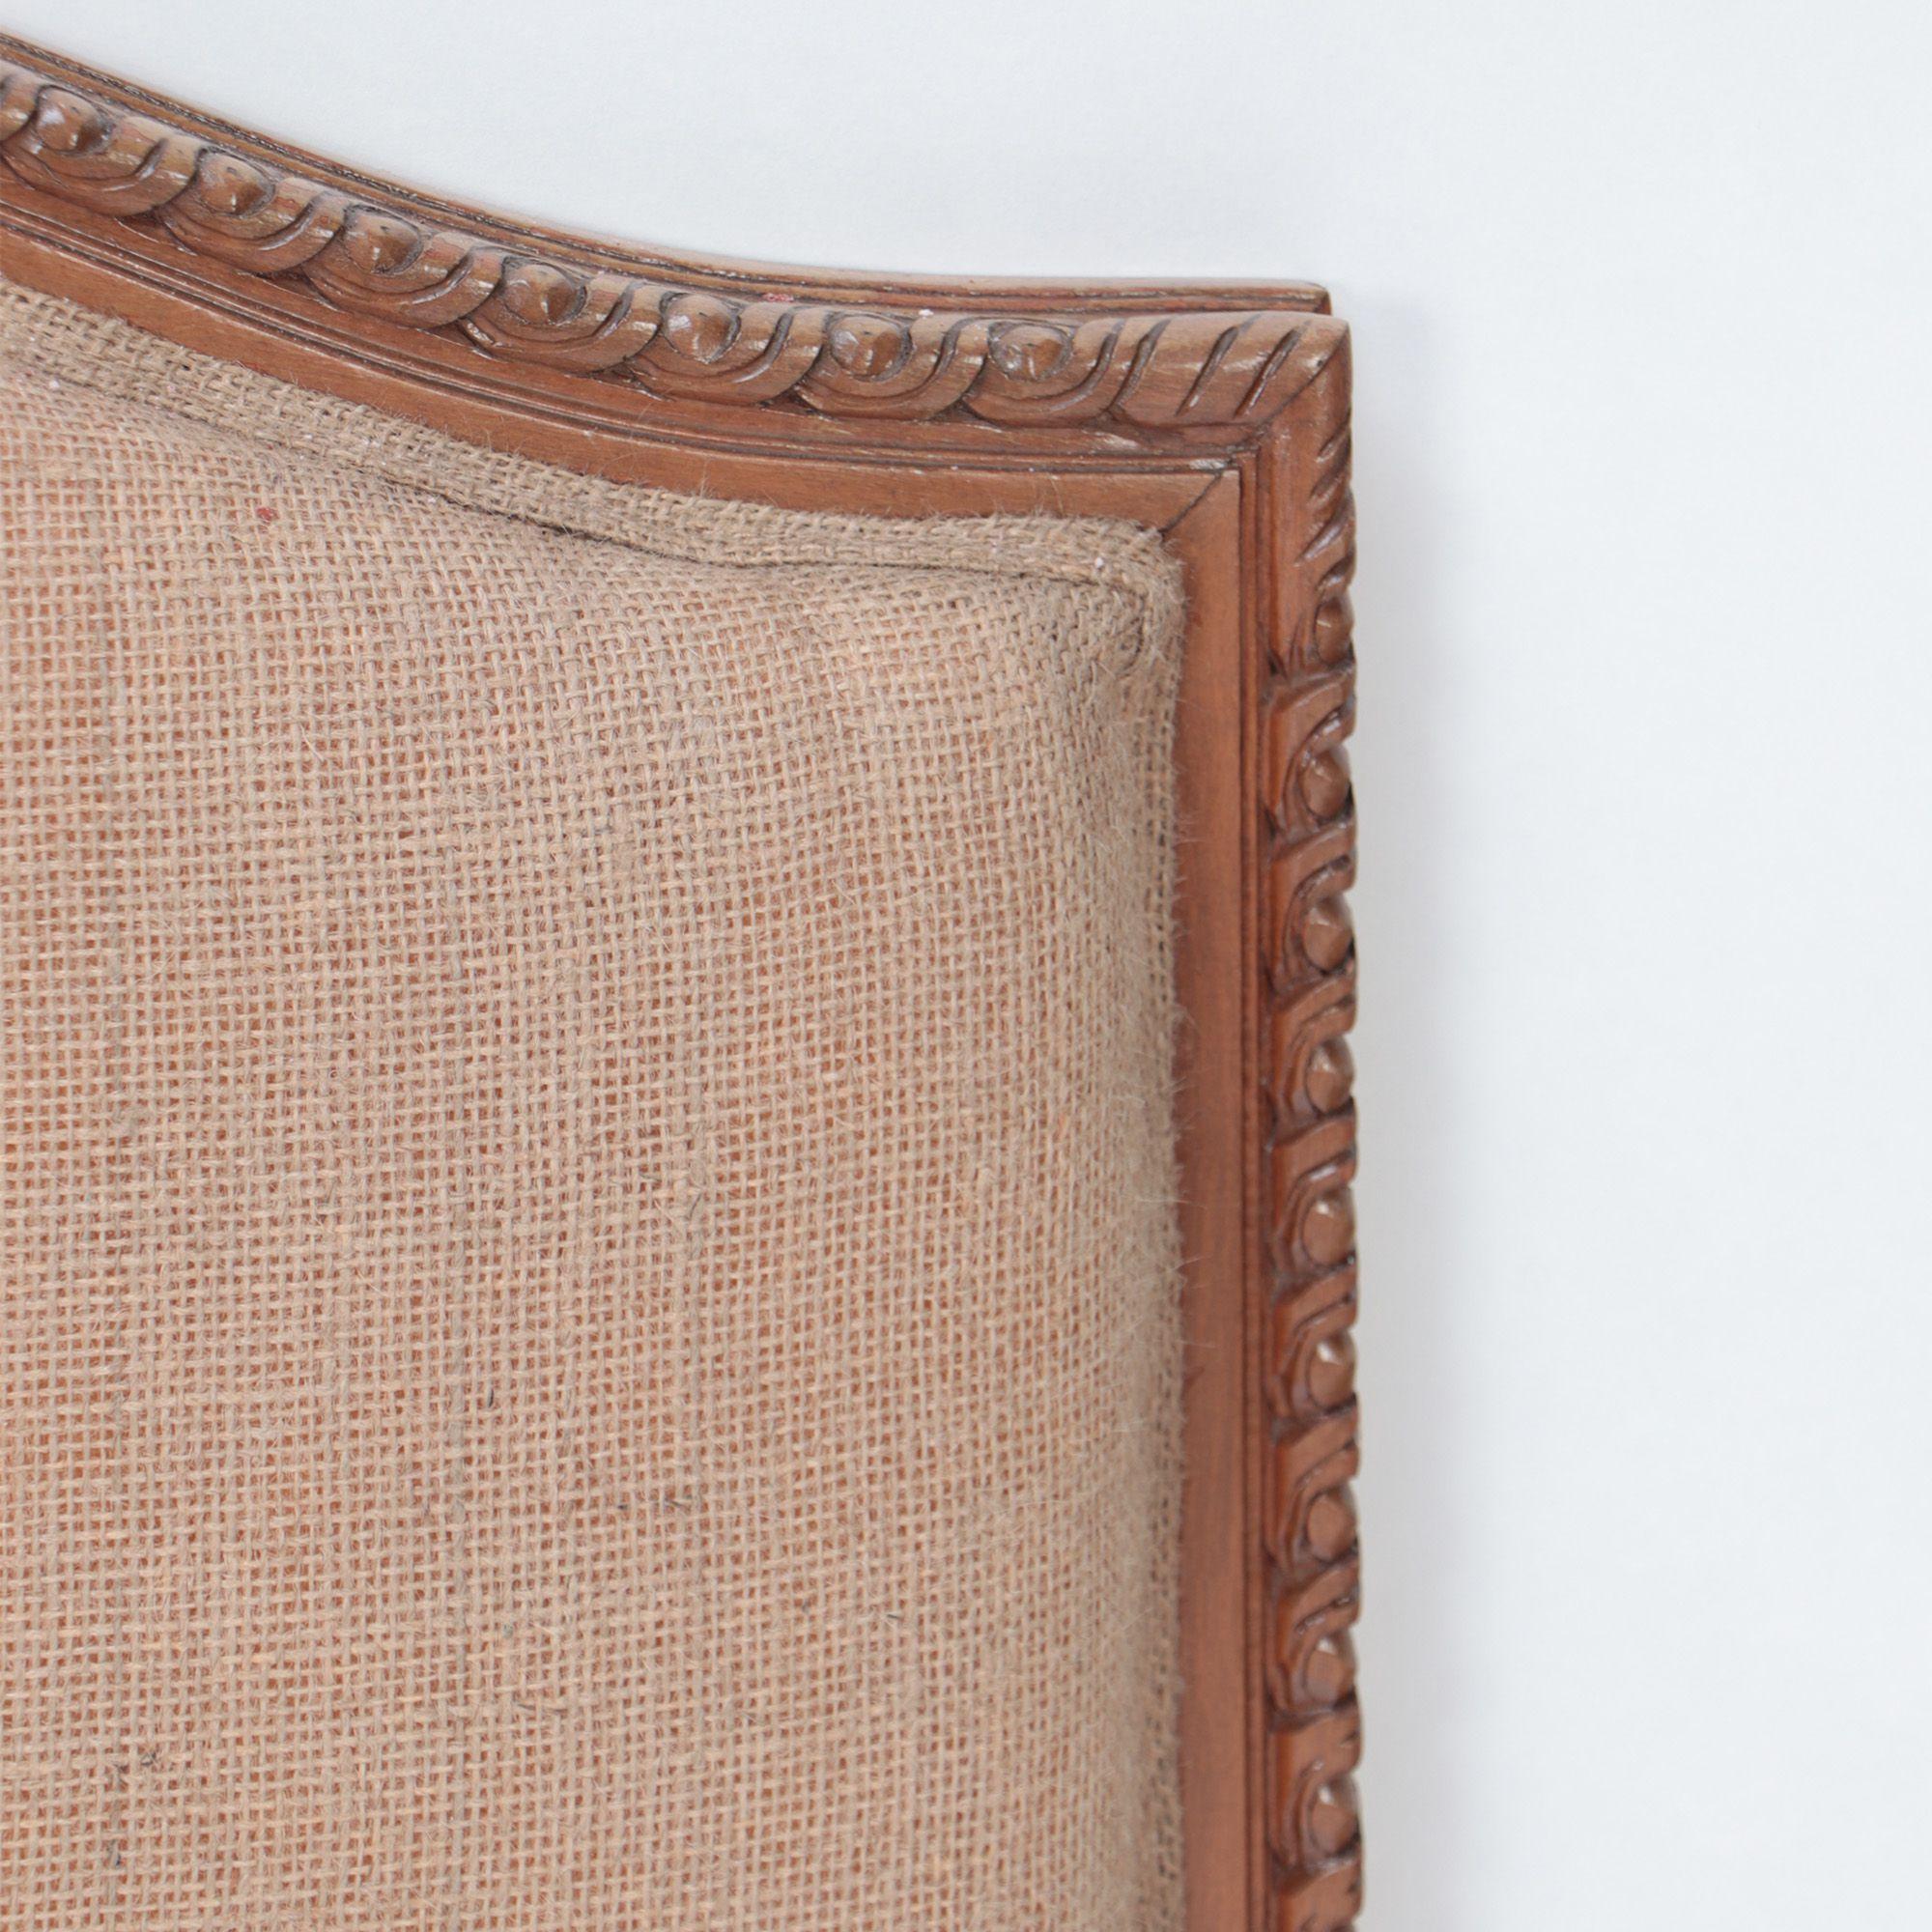 Mid-20th Century Pair of French Louis XVI Style Twin Beds Headboards in Burlap, circa 1950 For Sale